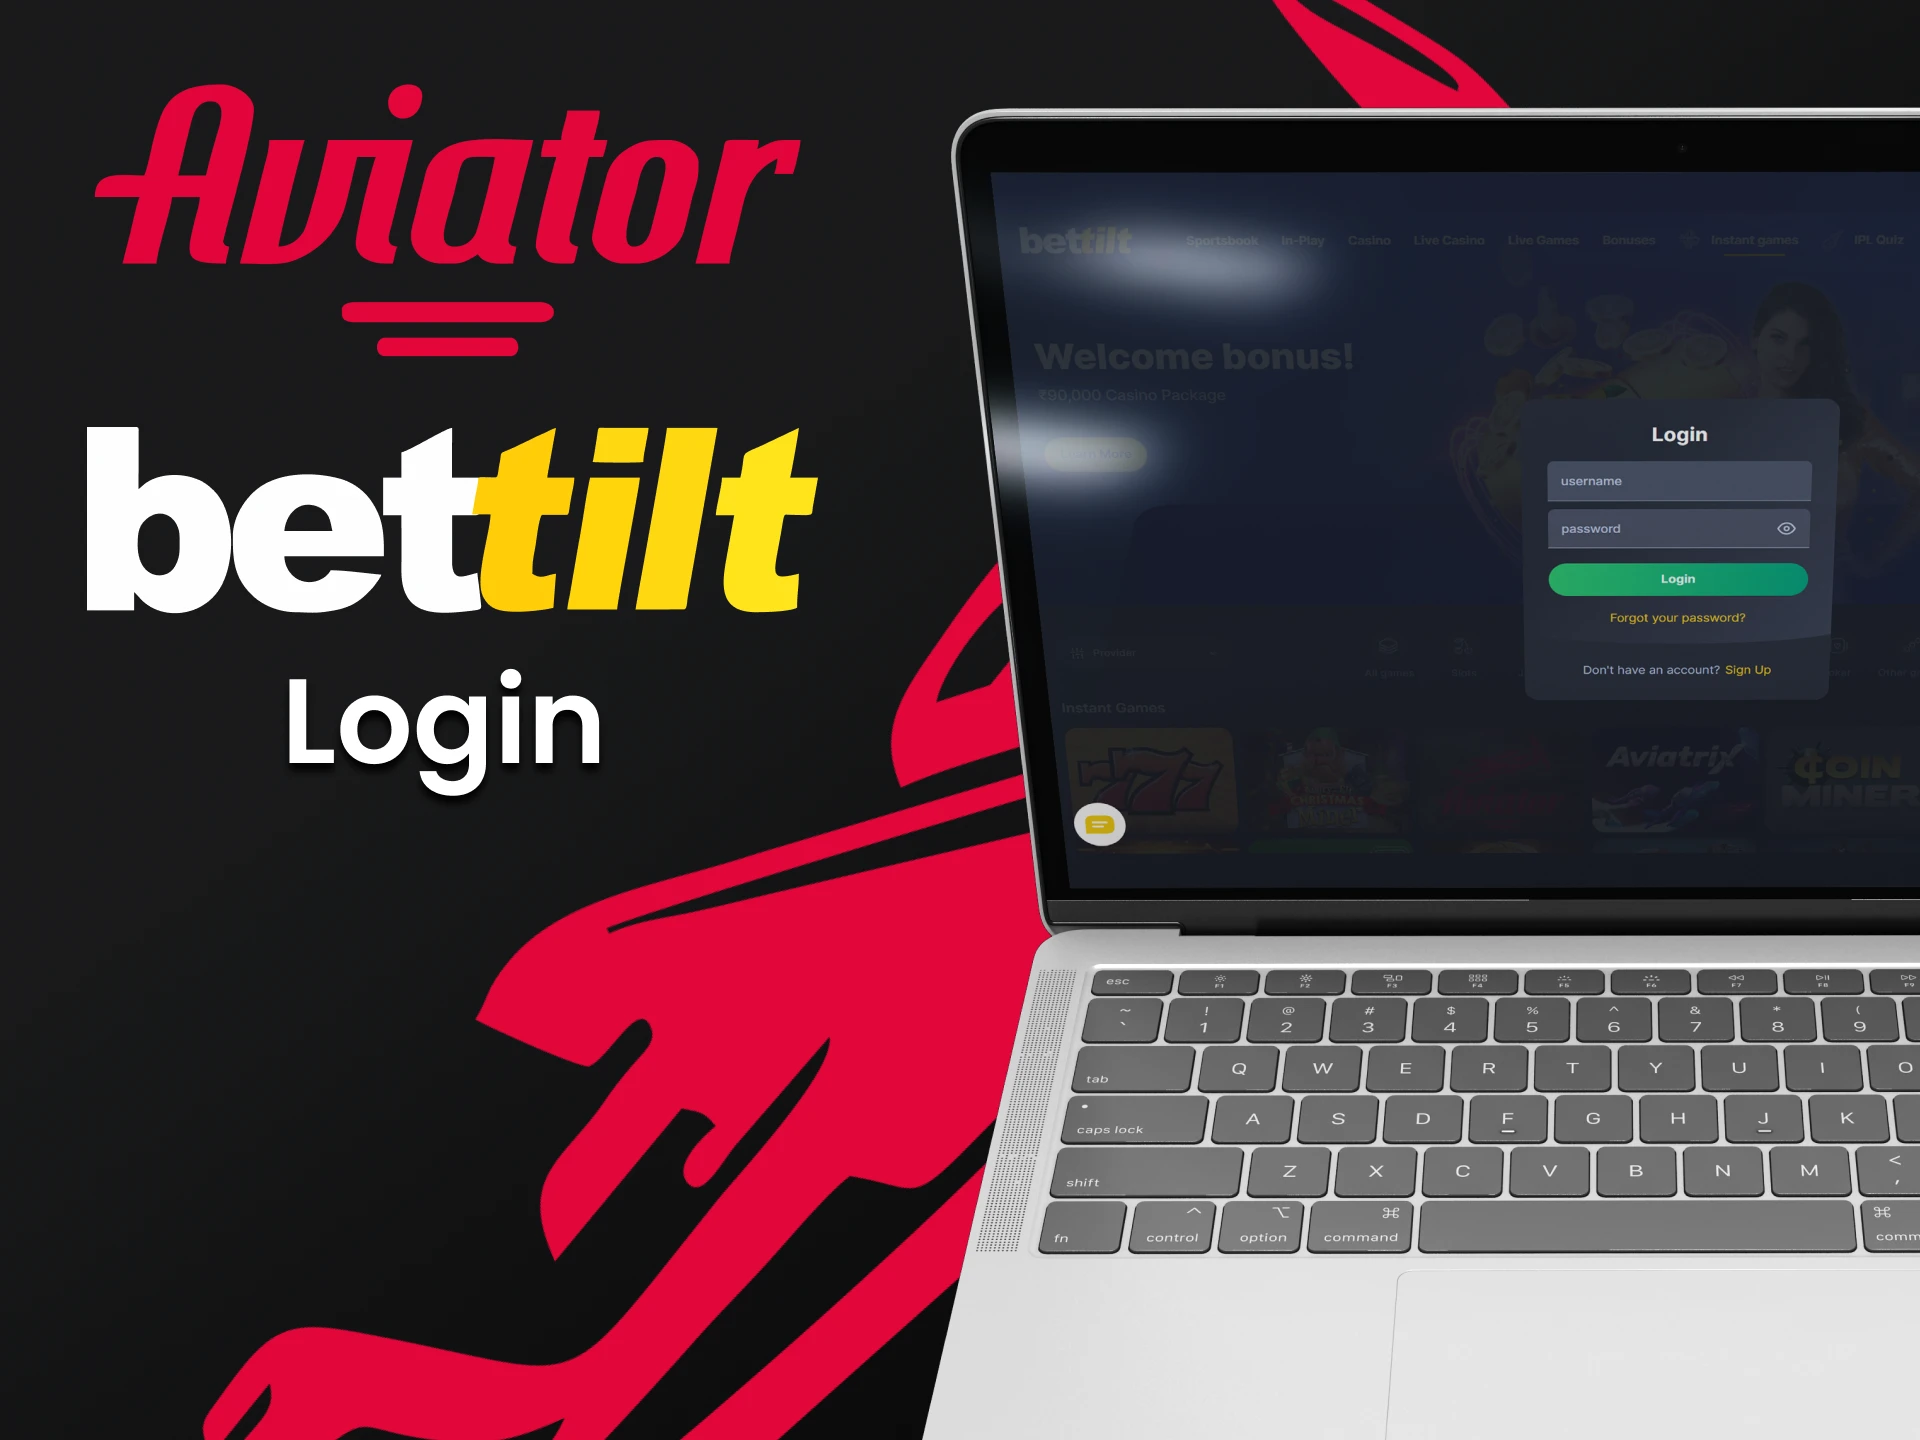 Log in to your Bettilt account and enjoy playing Aviator.